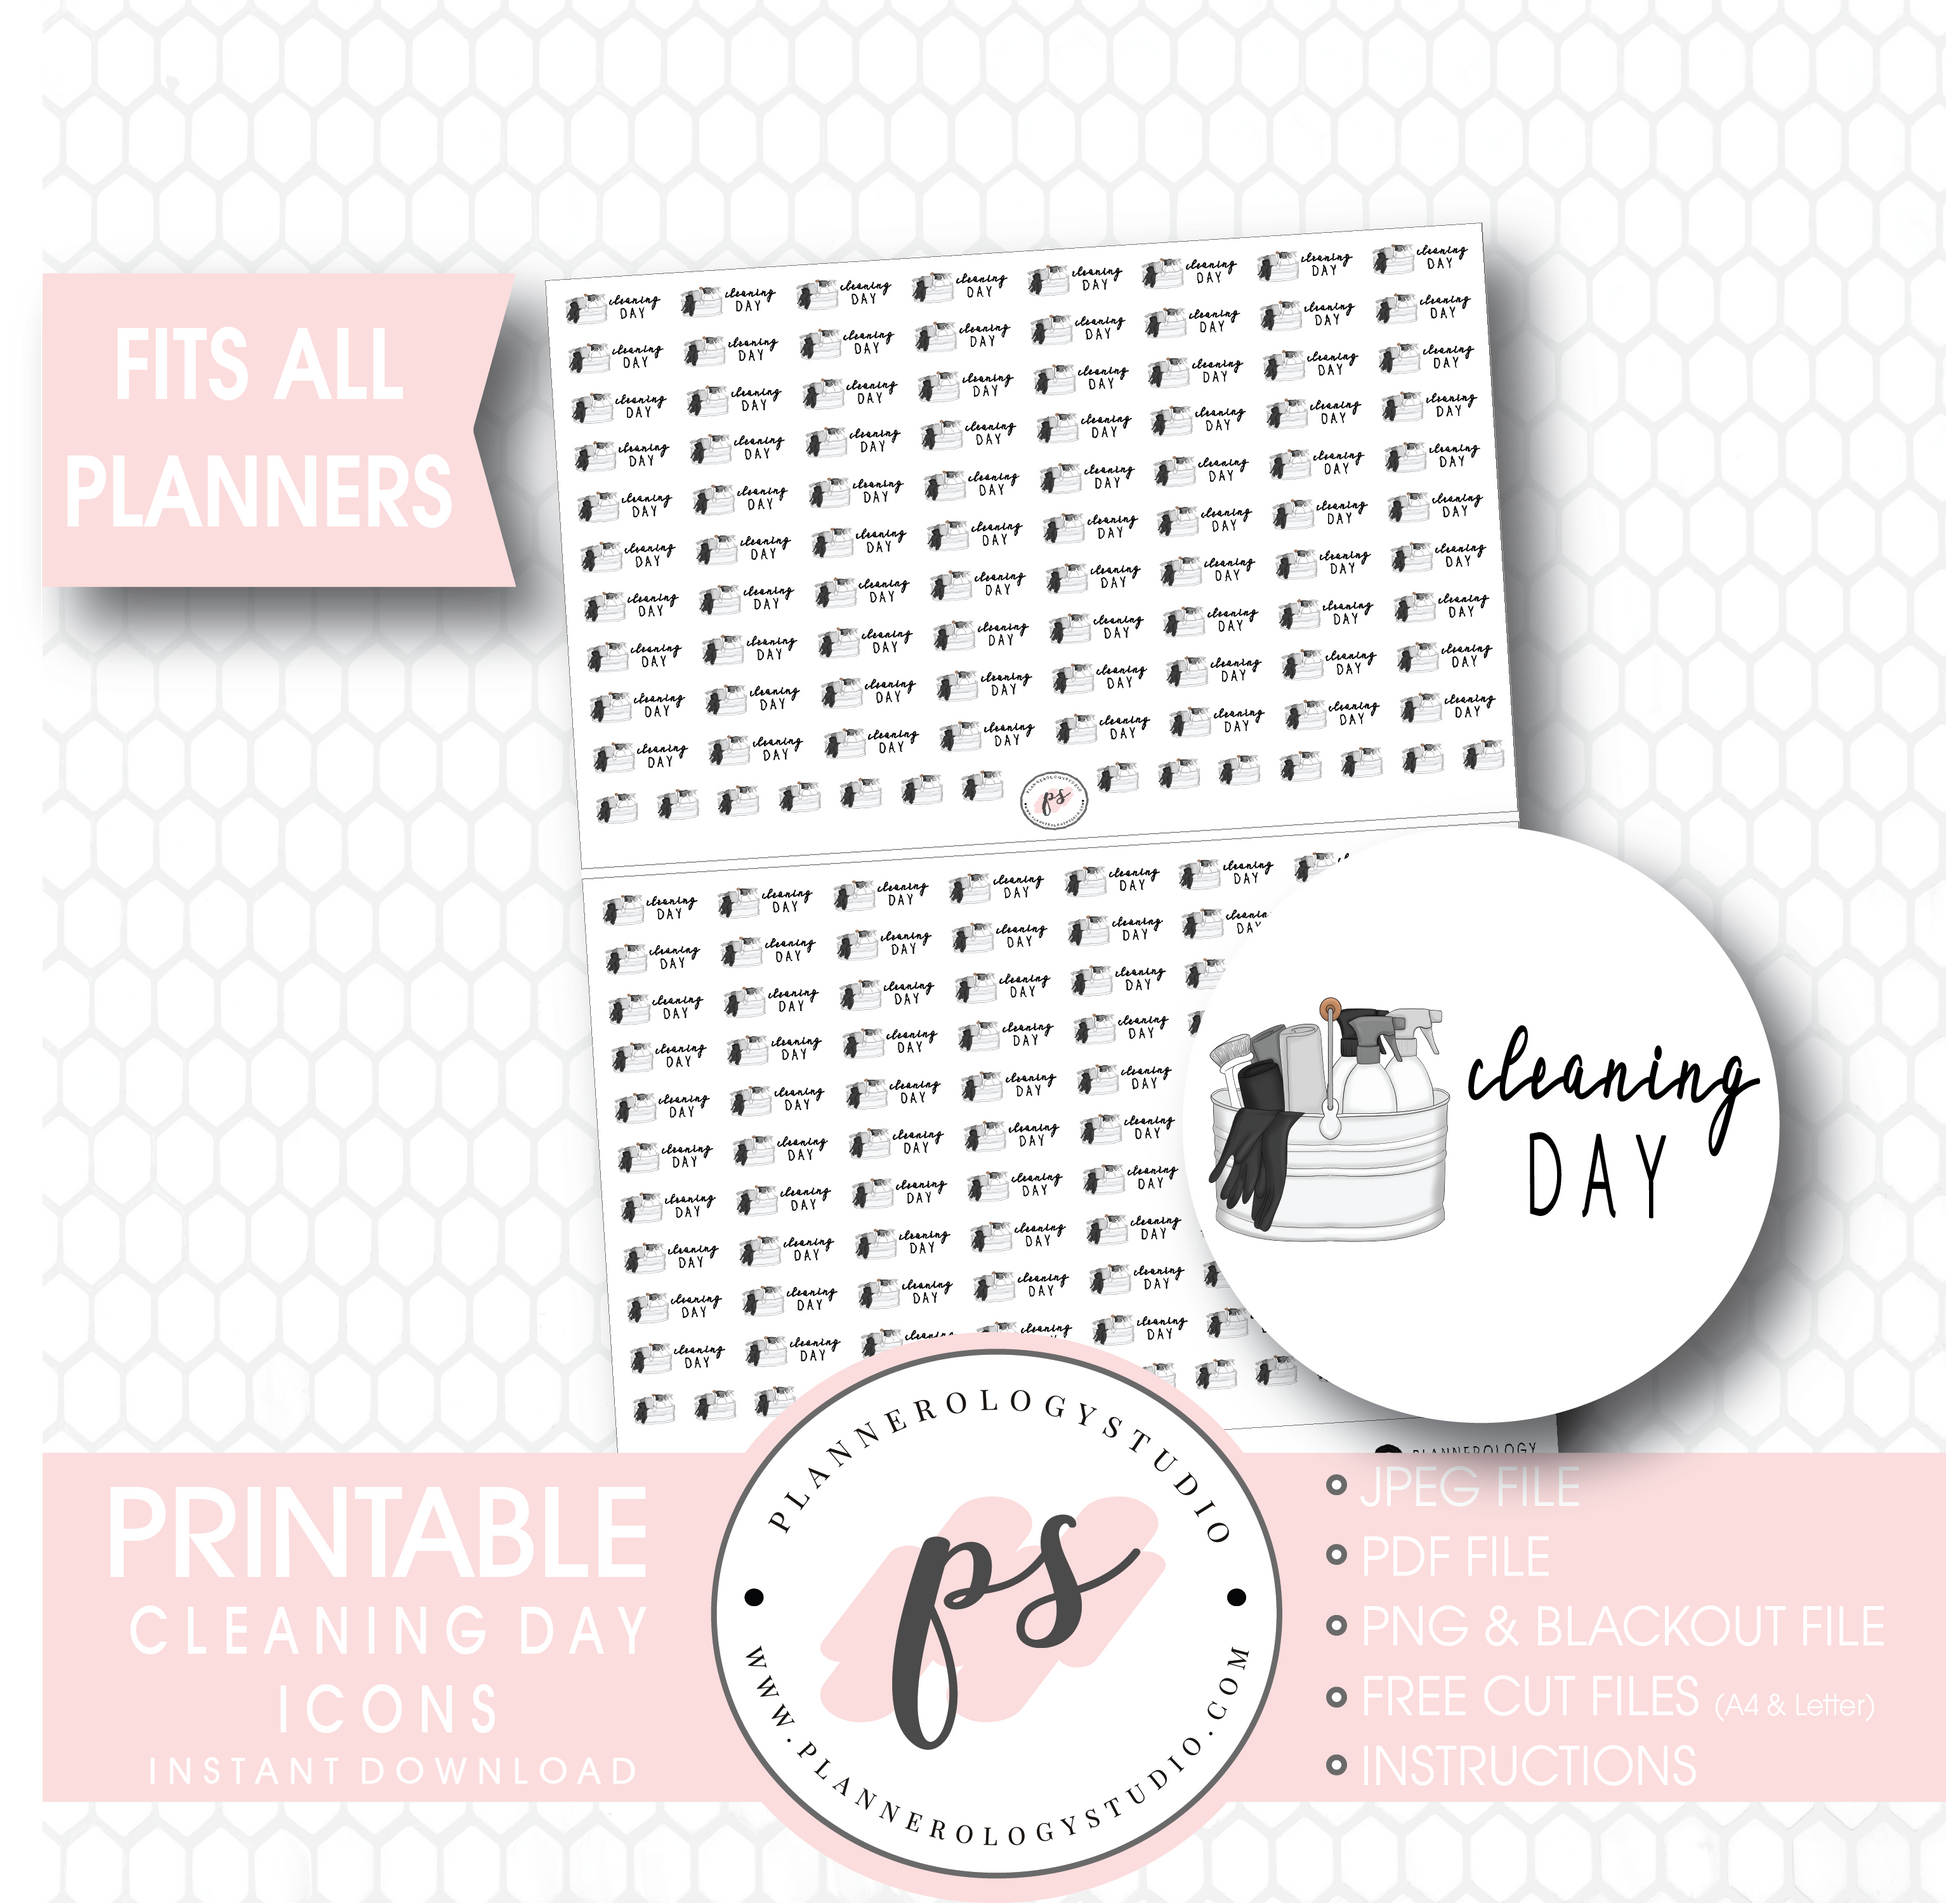 Cleaning Day Icons Digital Printable Planner Stickers - Plannerologystudio